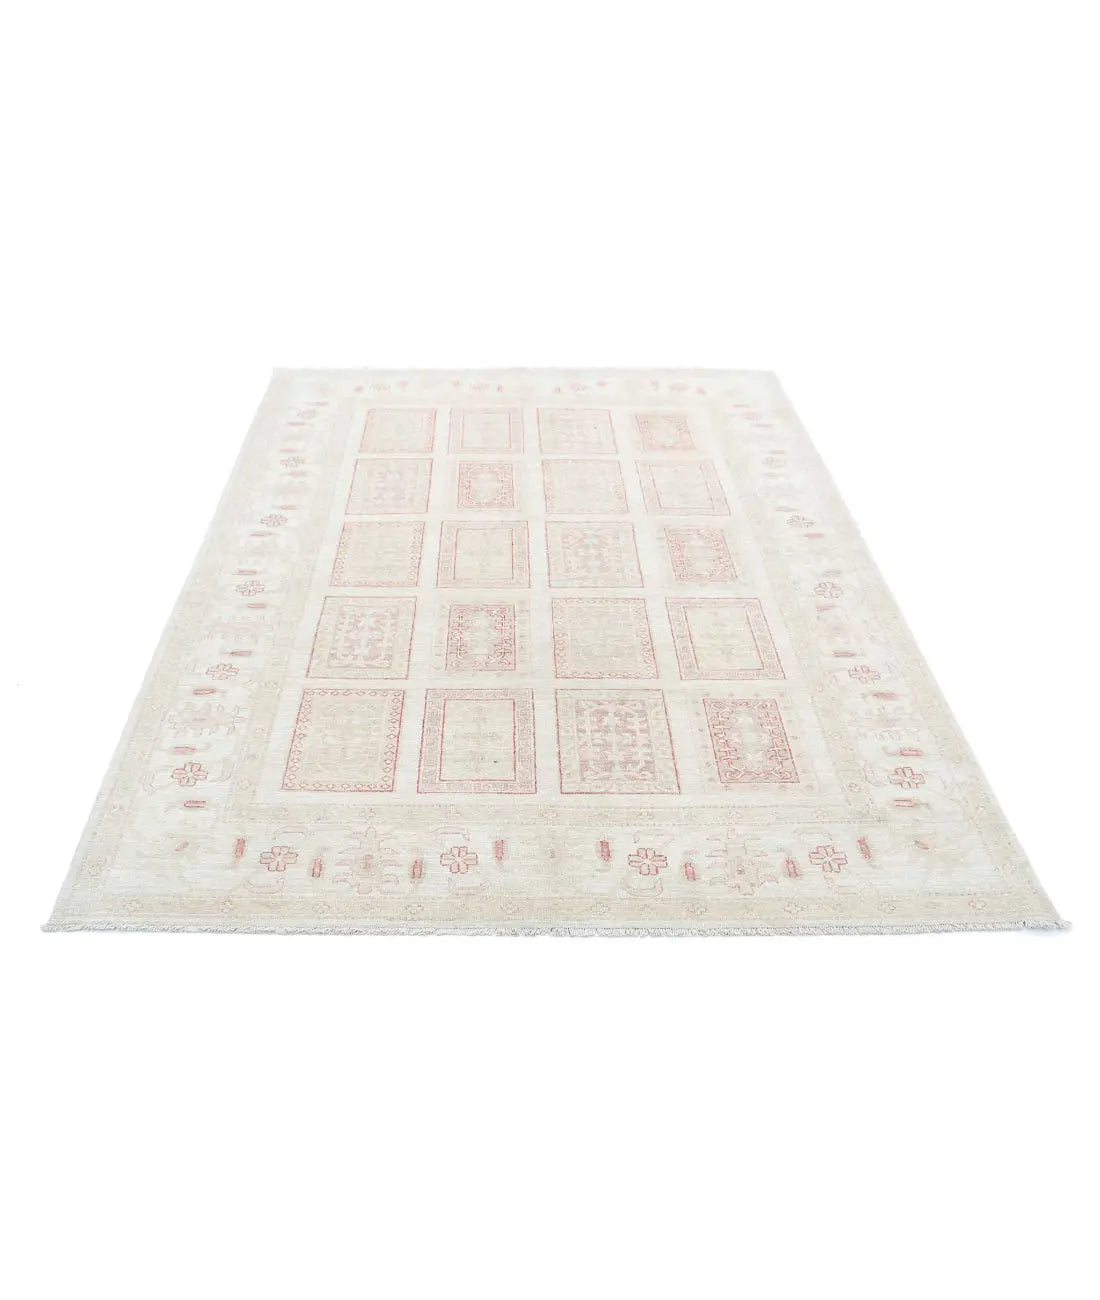 Hand Knotted Serenity Wool Rug - 5'6'' x 7'1''